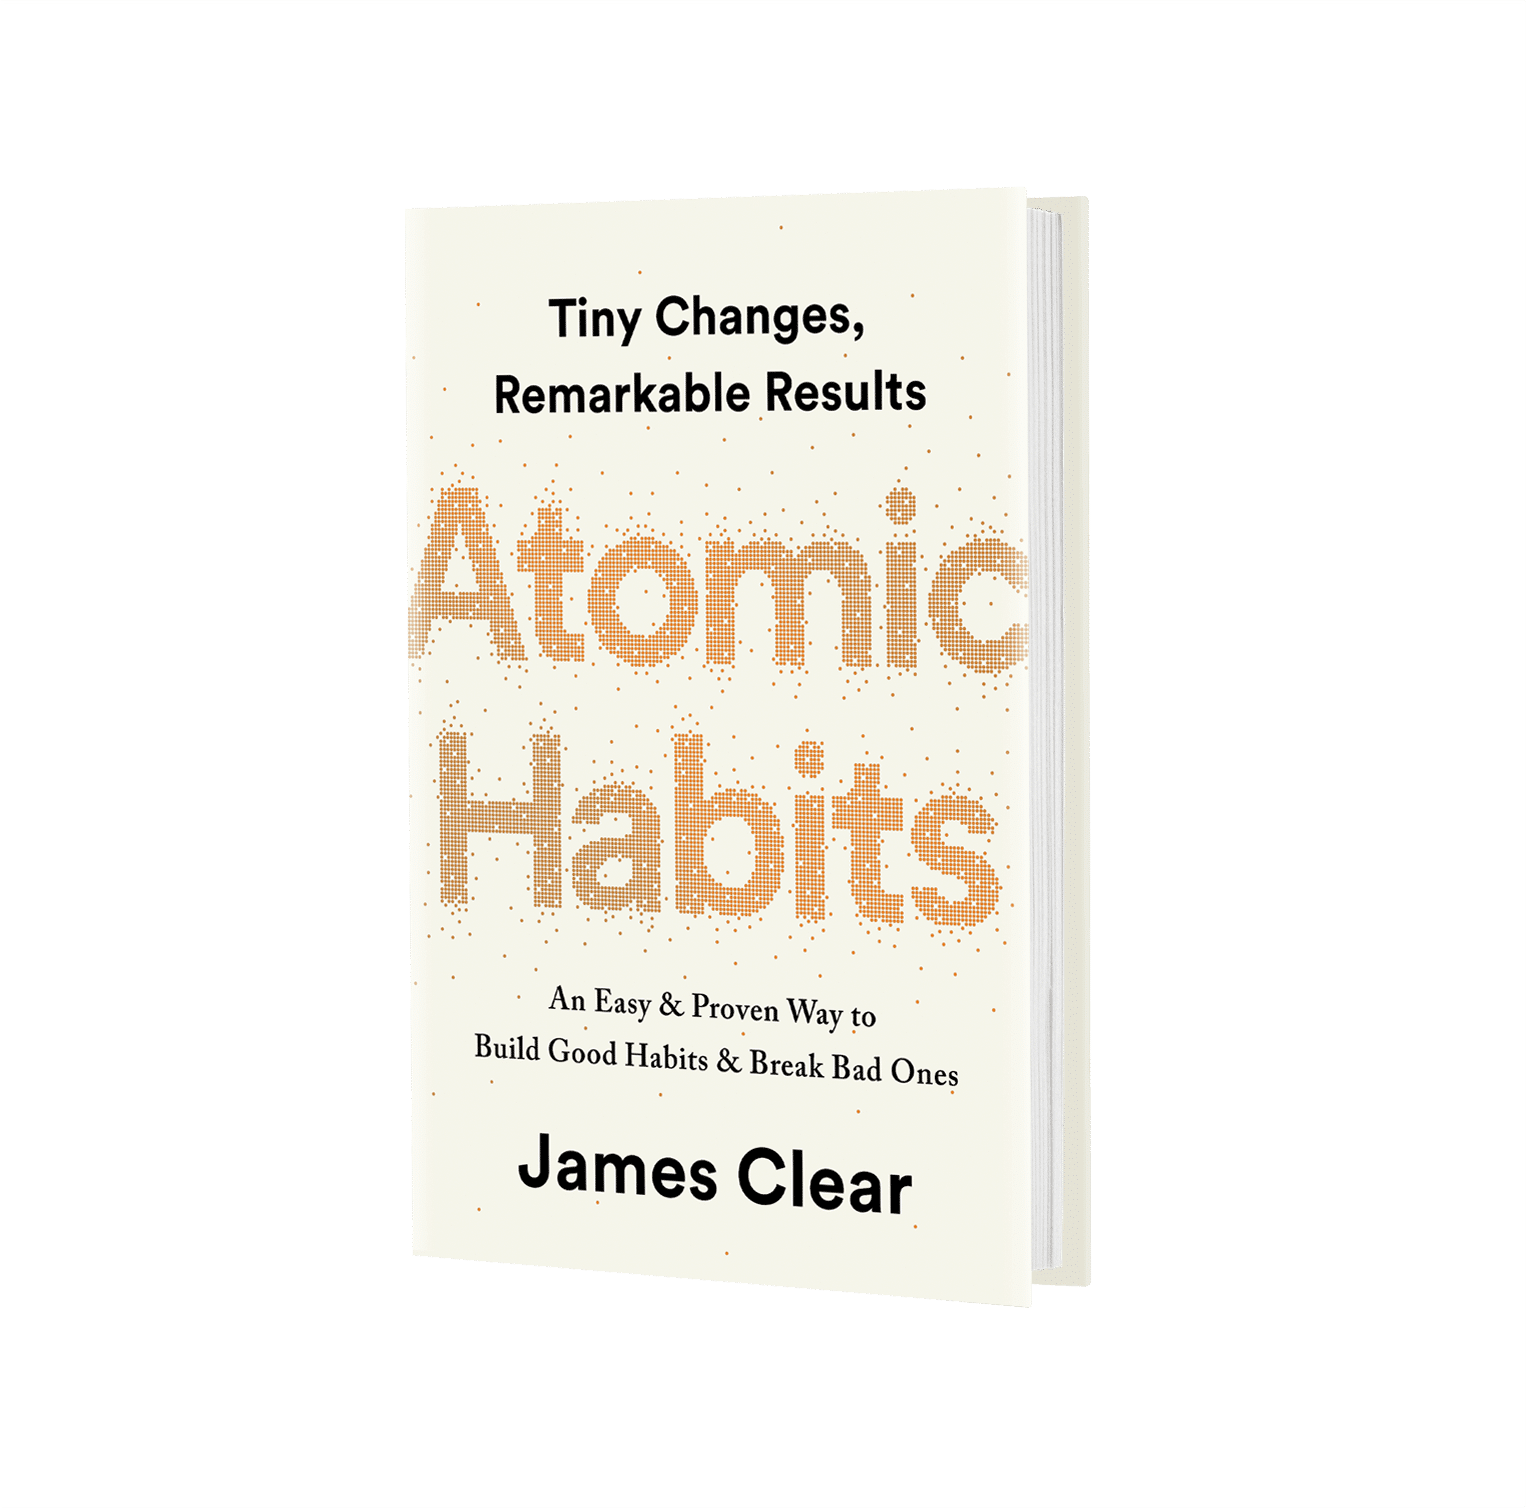 Atomic Habits by James Clear - A Summary